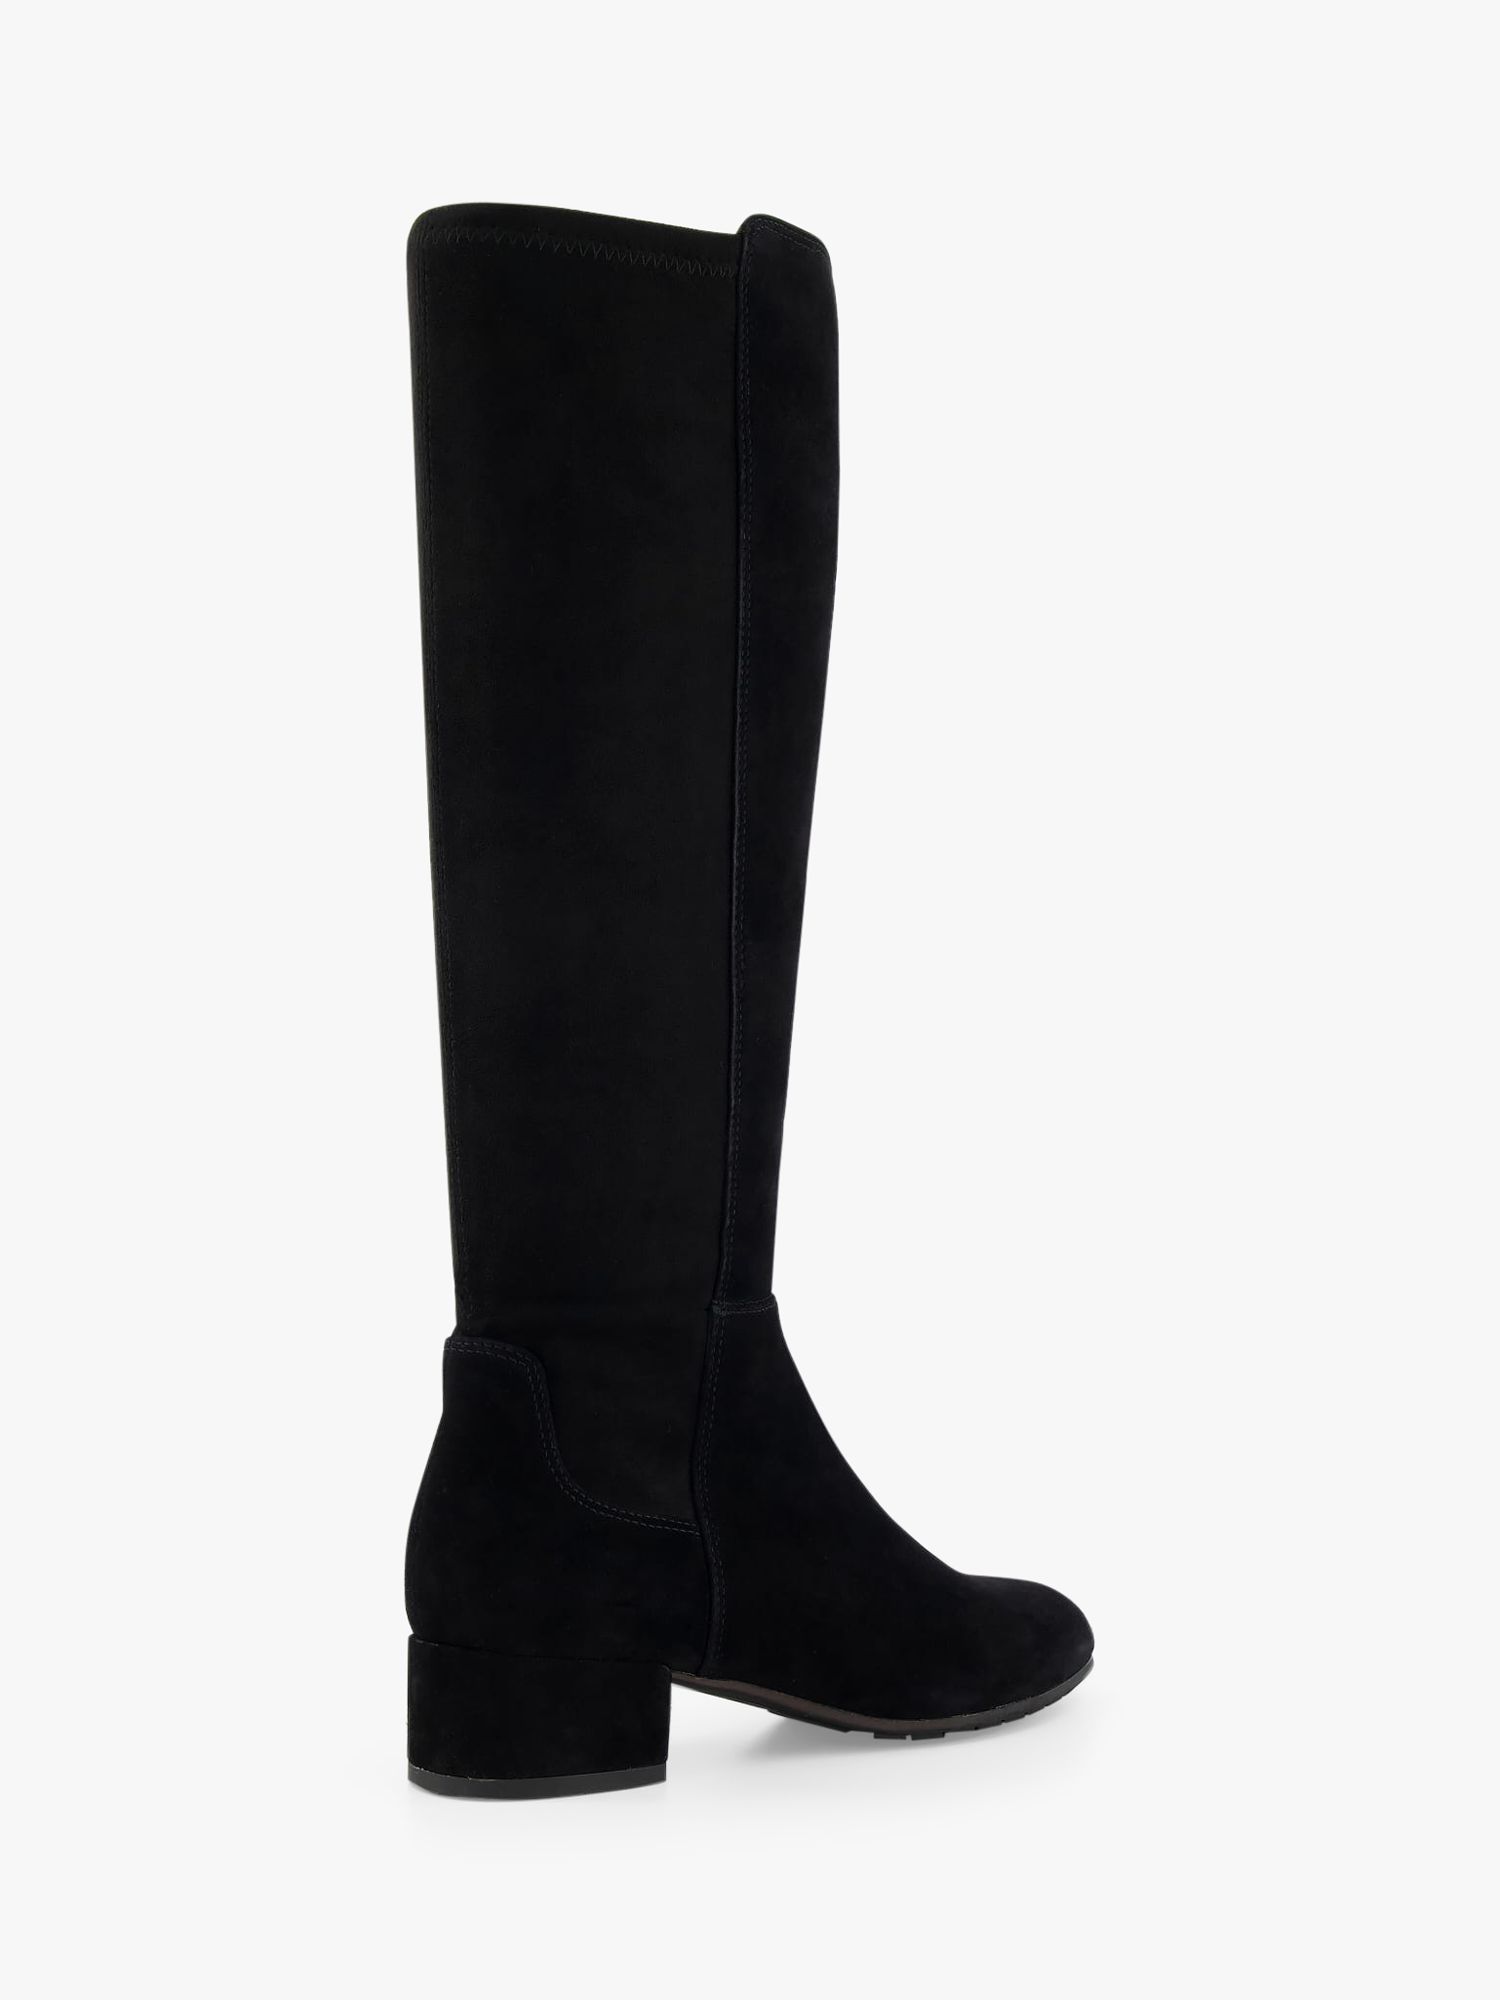 Dune Tayla Suede Knee High Boots, Black, 3